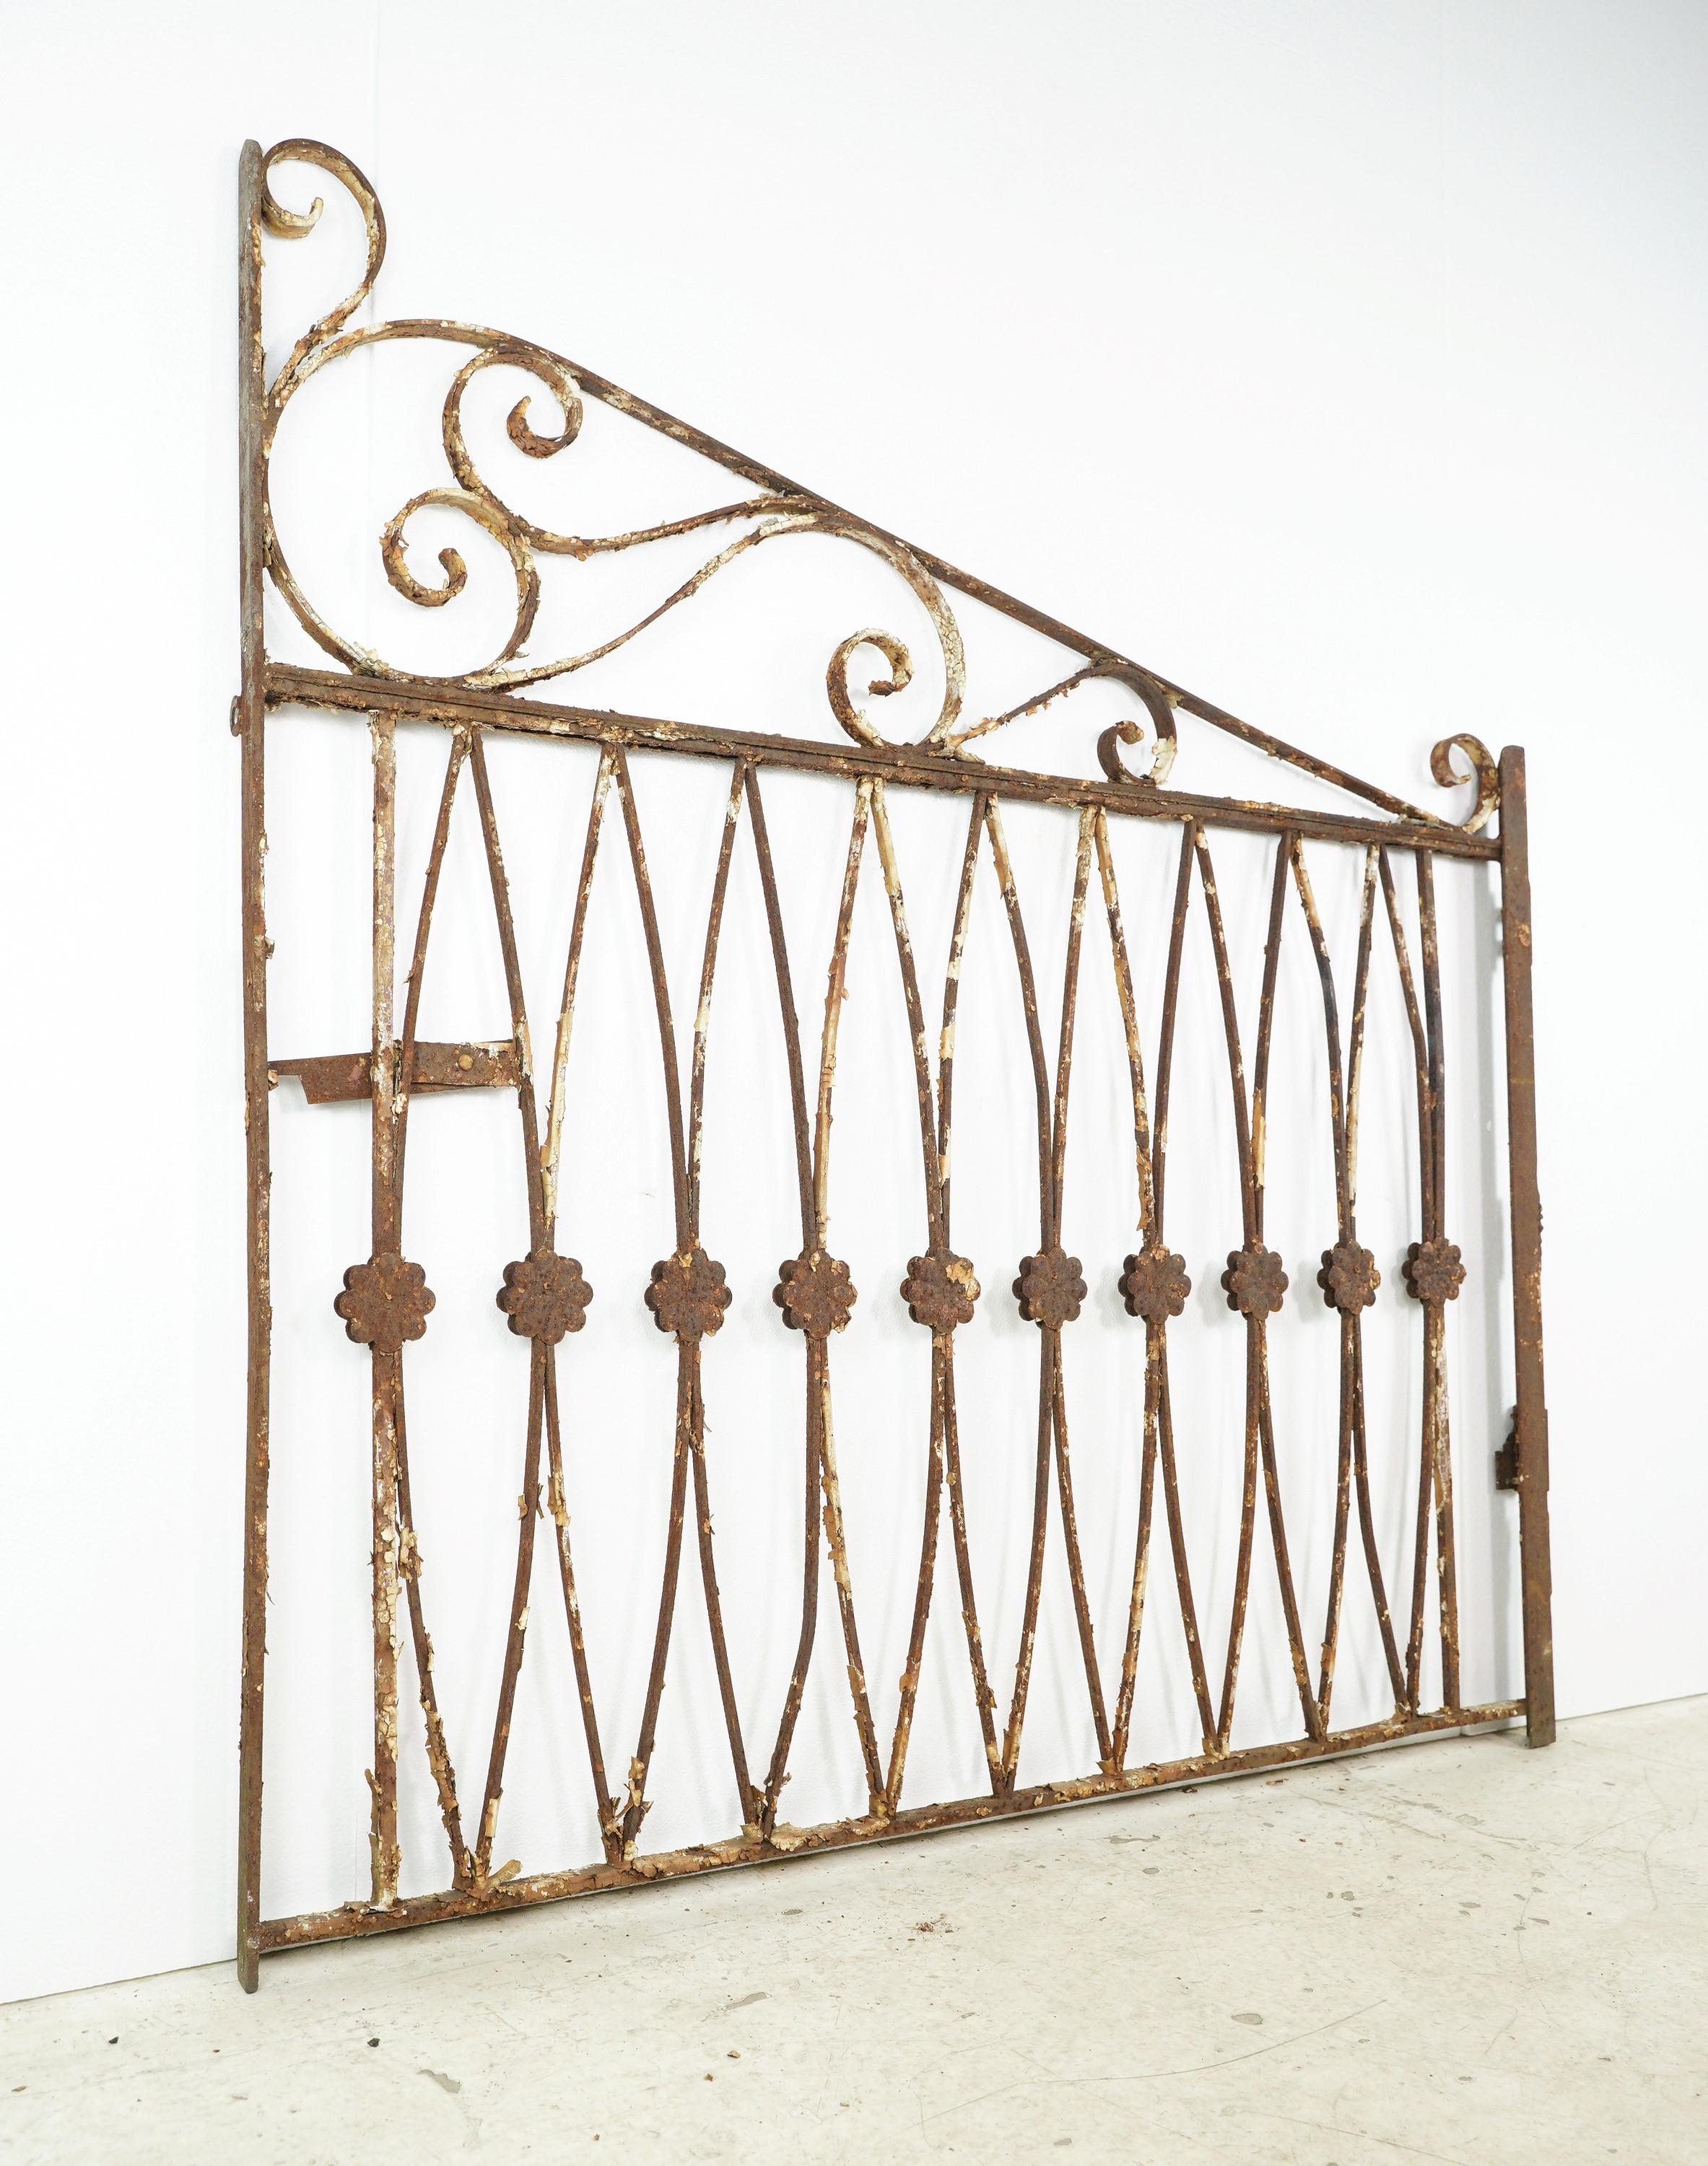 111 in. Ovals & Swirls Wrought Iron Double Driveway Gates For Sale 8